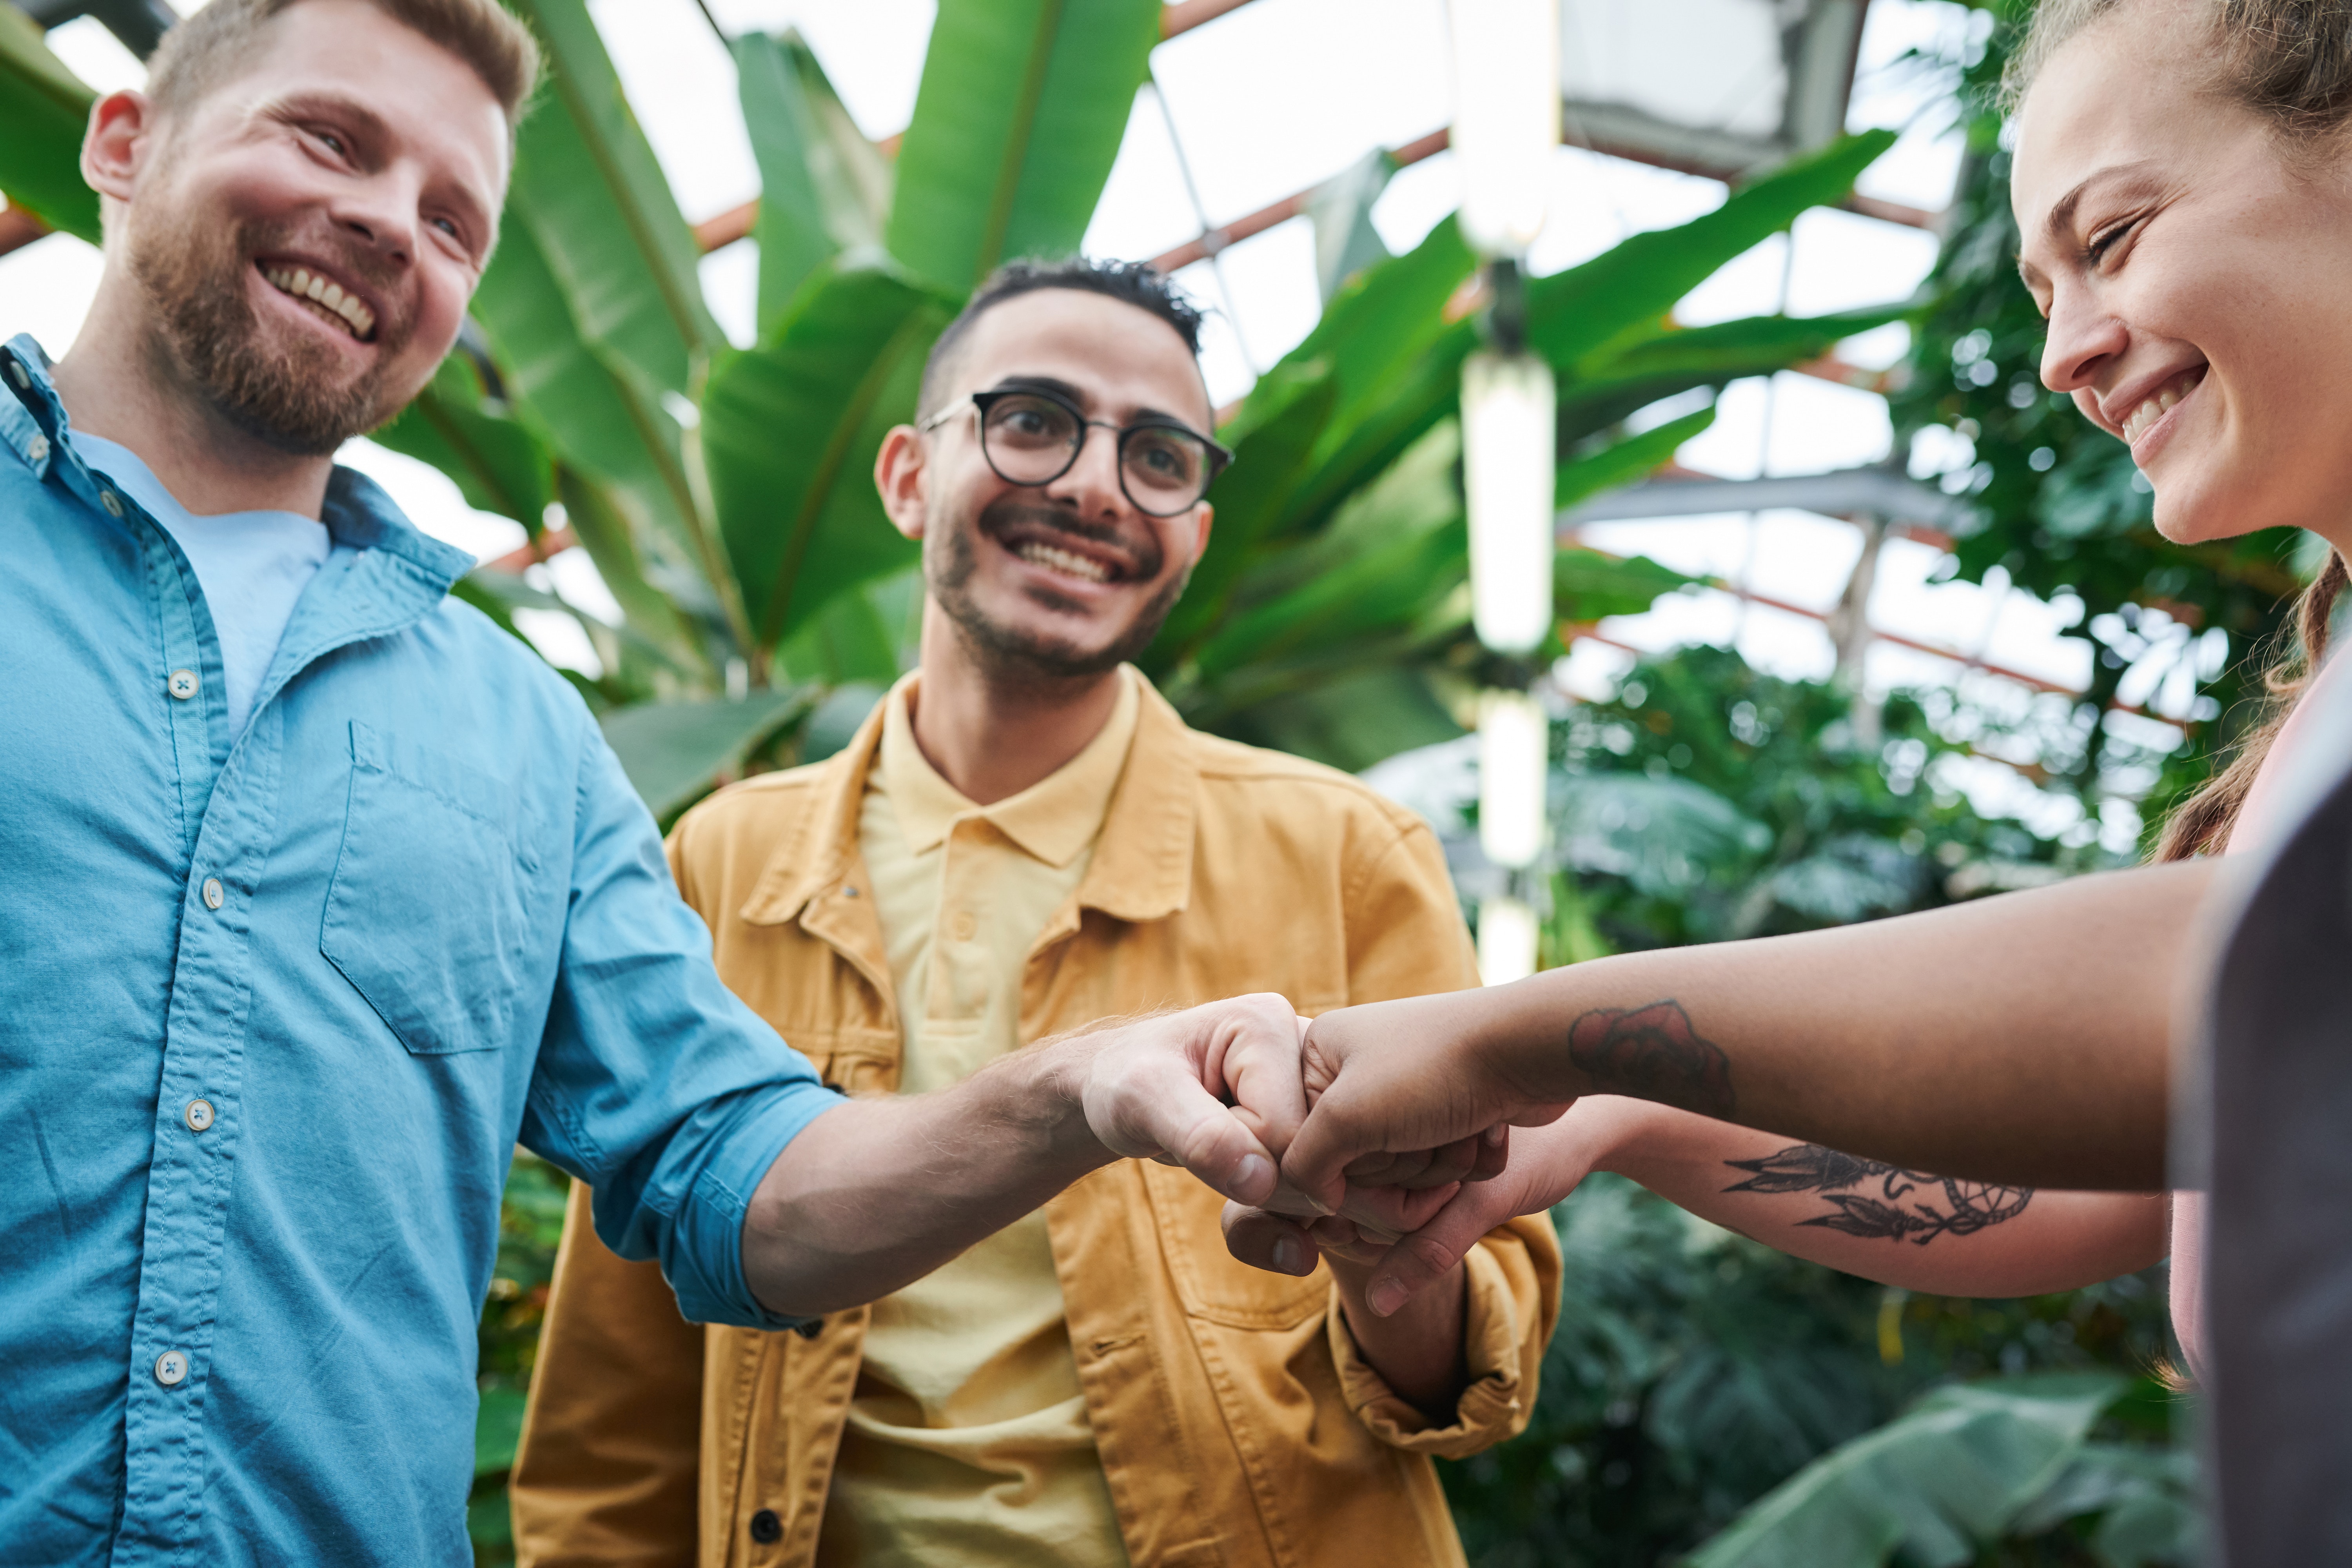 Picture of a man with glasses fist bumping his friends smiling